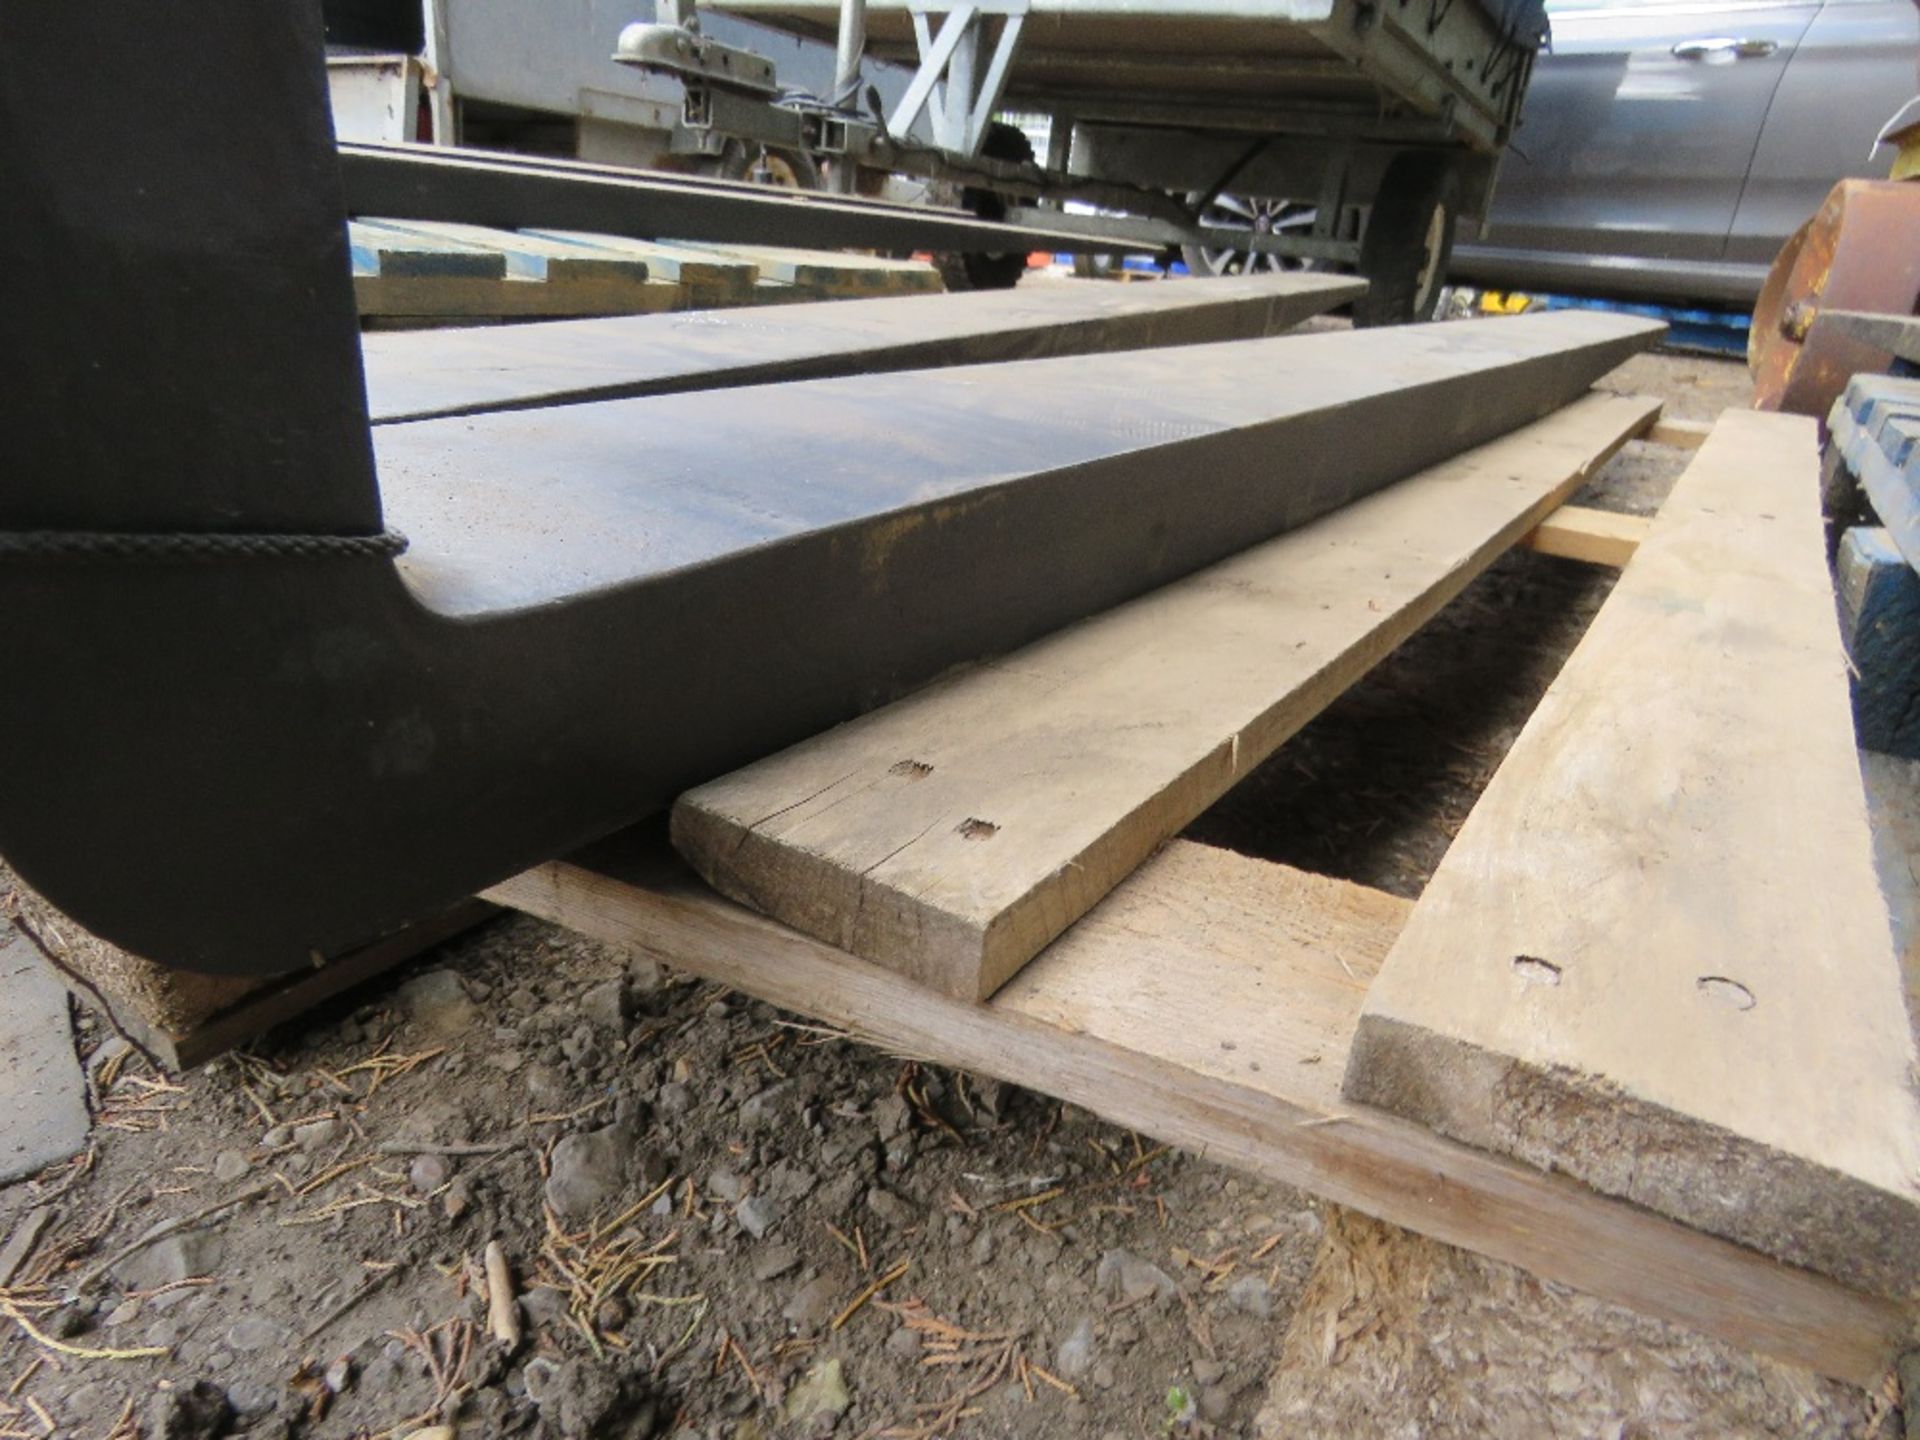 PAIR OF USED FORKLIFT TINES, 20" CARRIAGE, 1.8M LENGTH APPROX. - Image 3 of 3